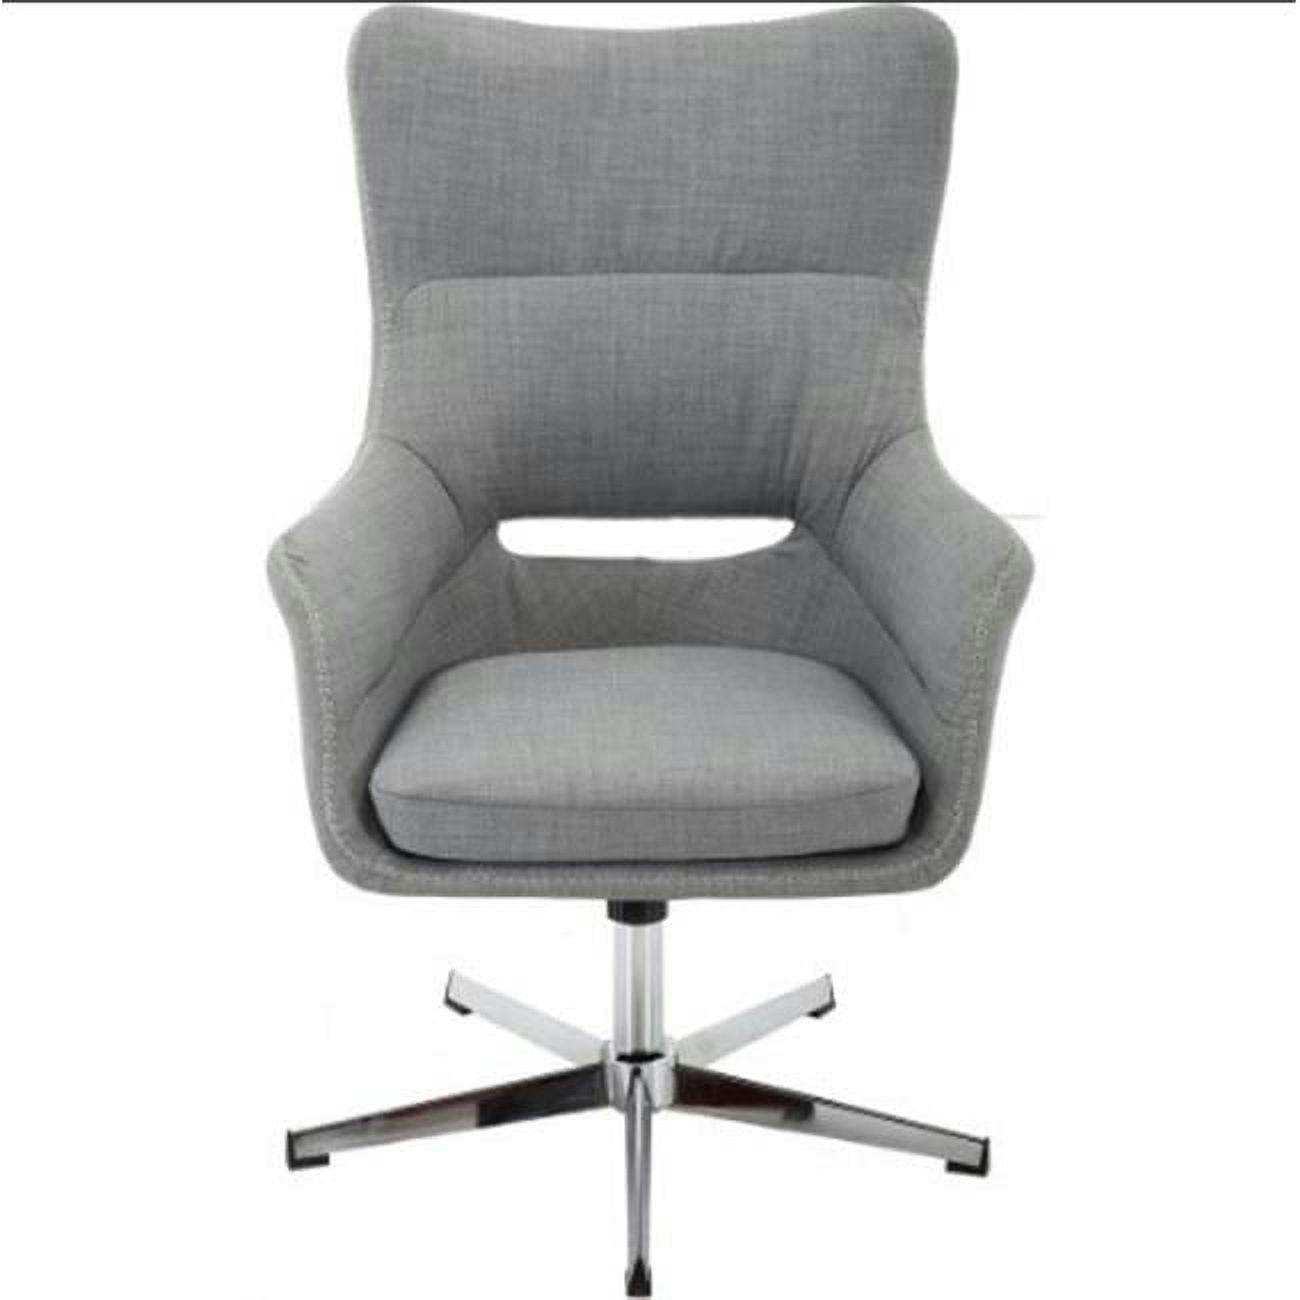 Carlton Executive Wingback Gray Leather Office Chair with Chrome Swivel Base